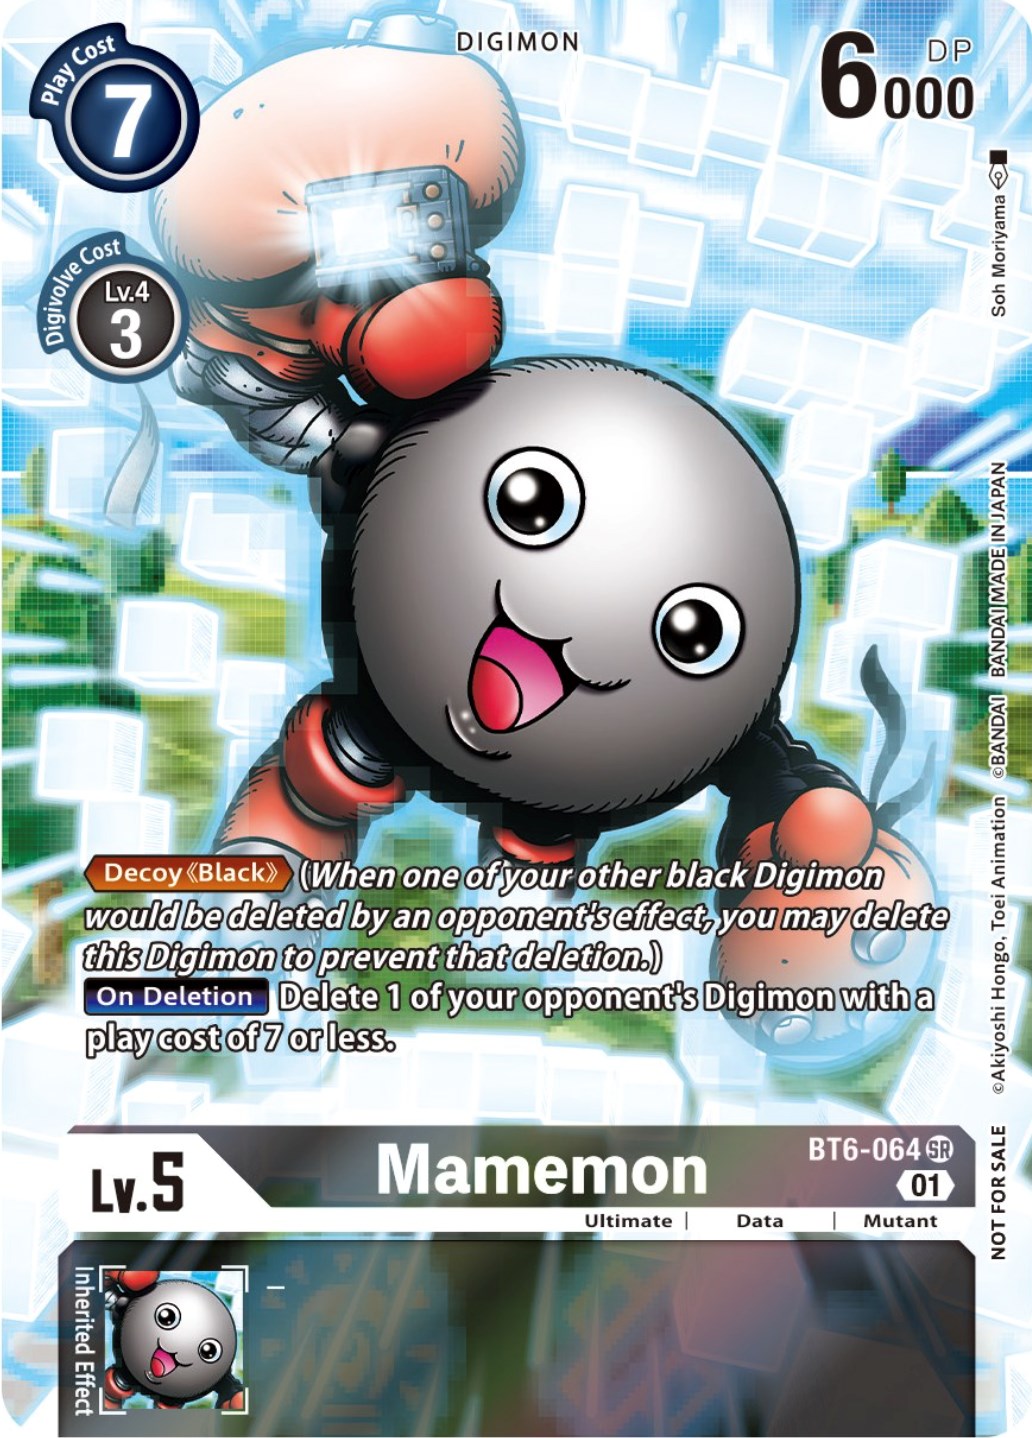 Mamemon [BT6-064] (25th Special Memorial Pack) [Double Diamond Promos] | The Time Vault CA